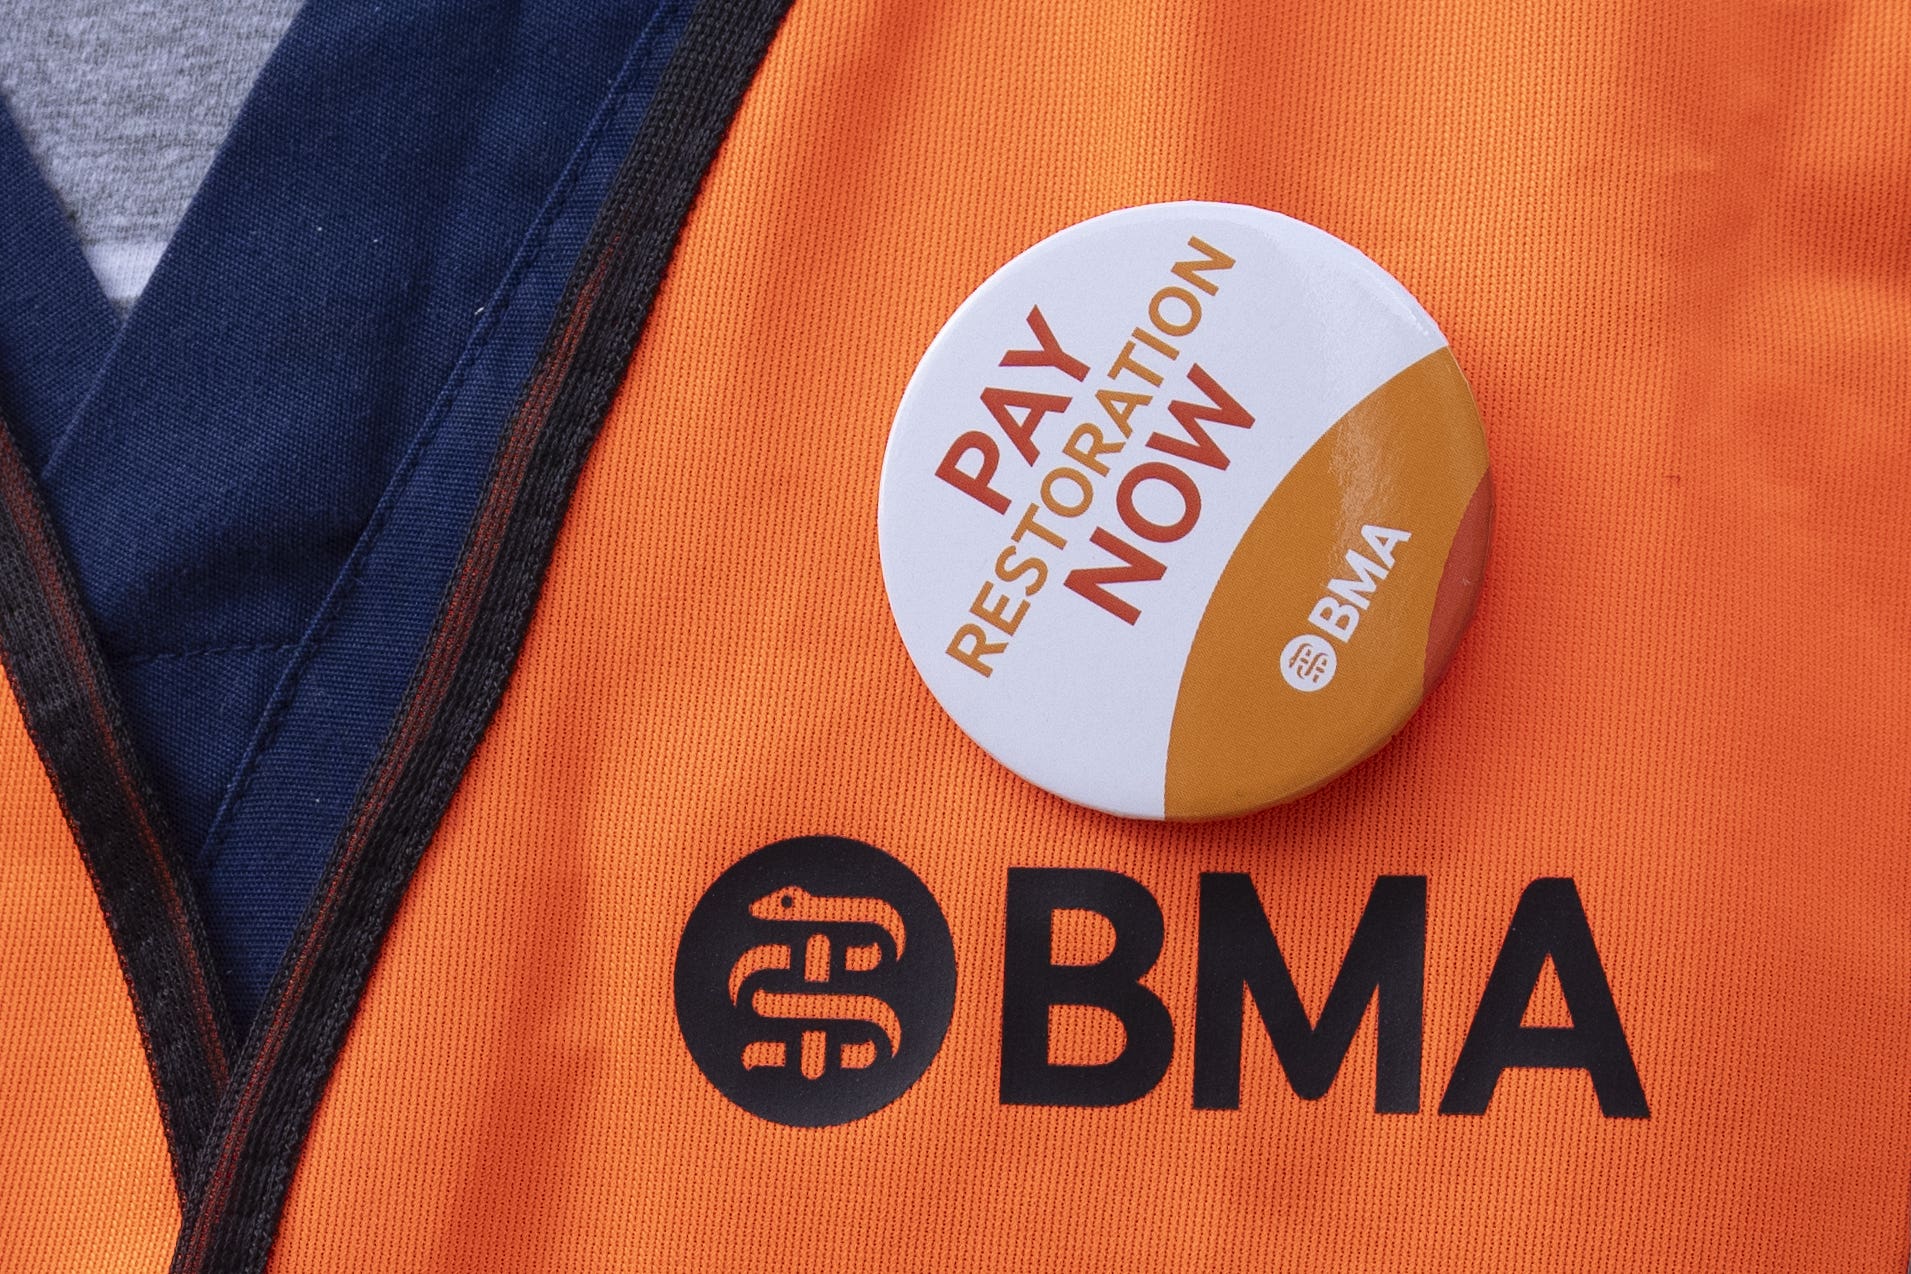 A junior doctor sporting a BMA badge backing the pay rise initiative